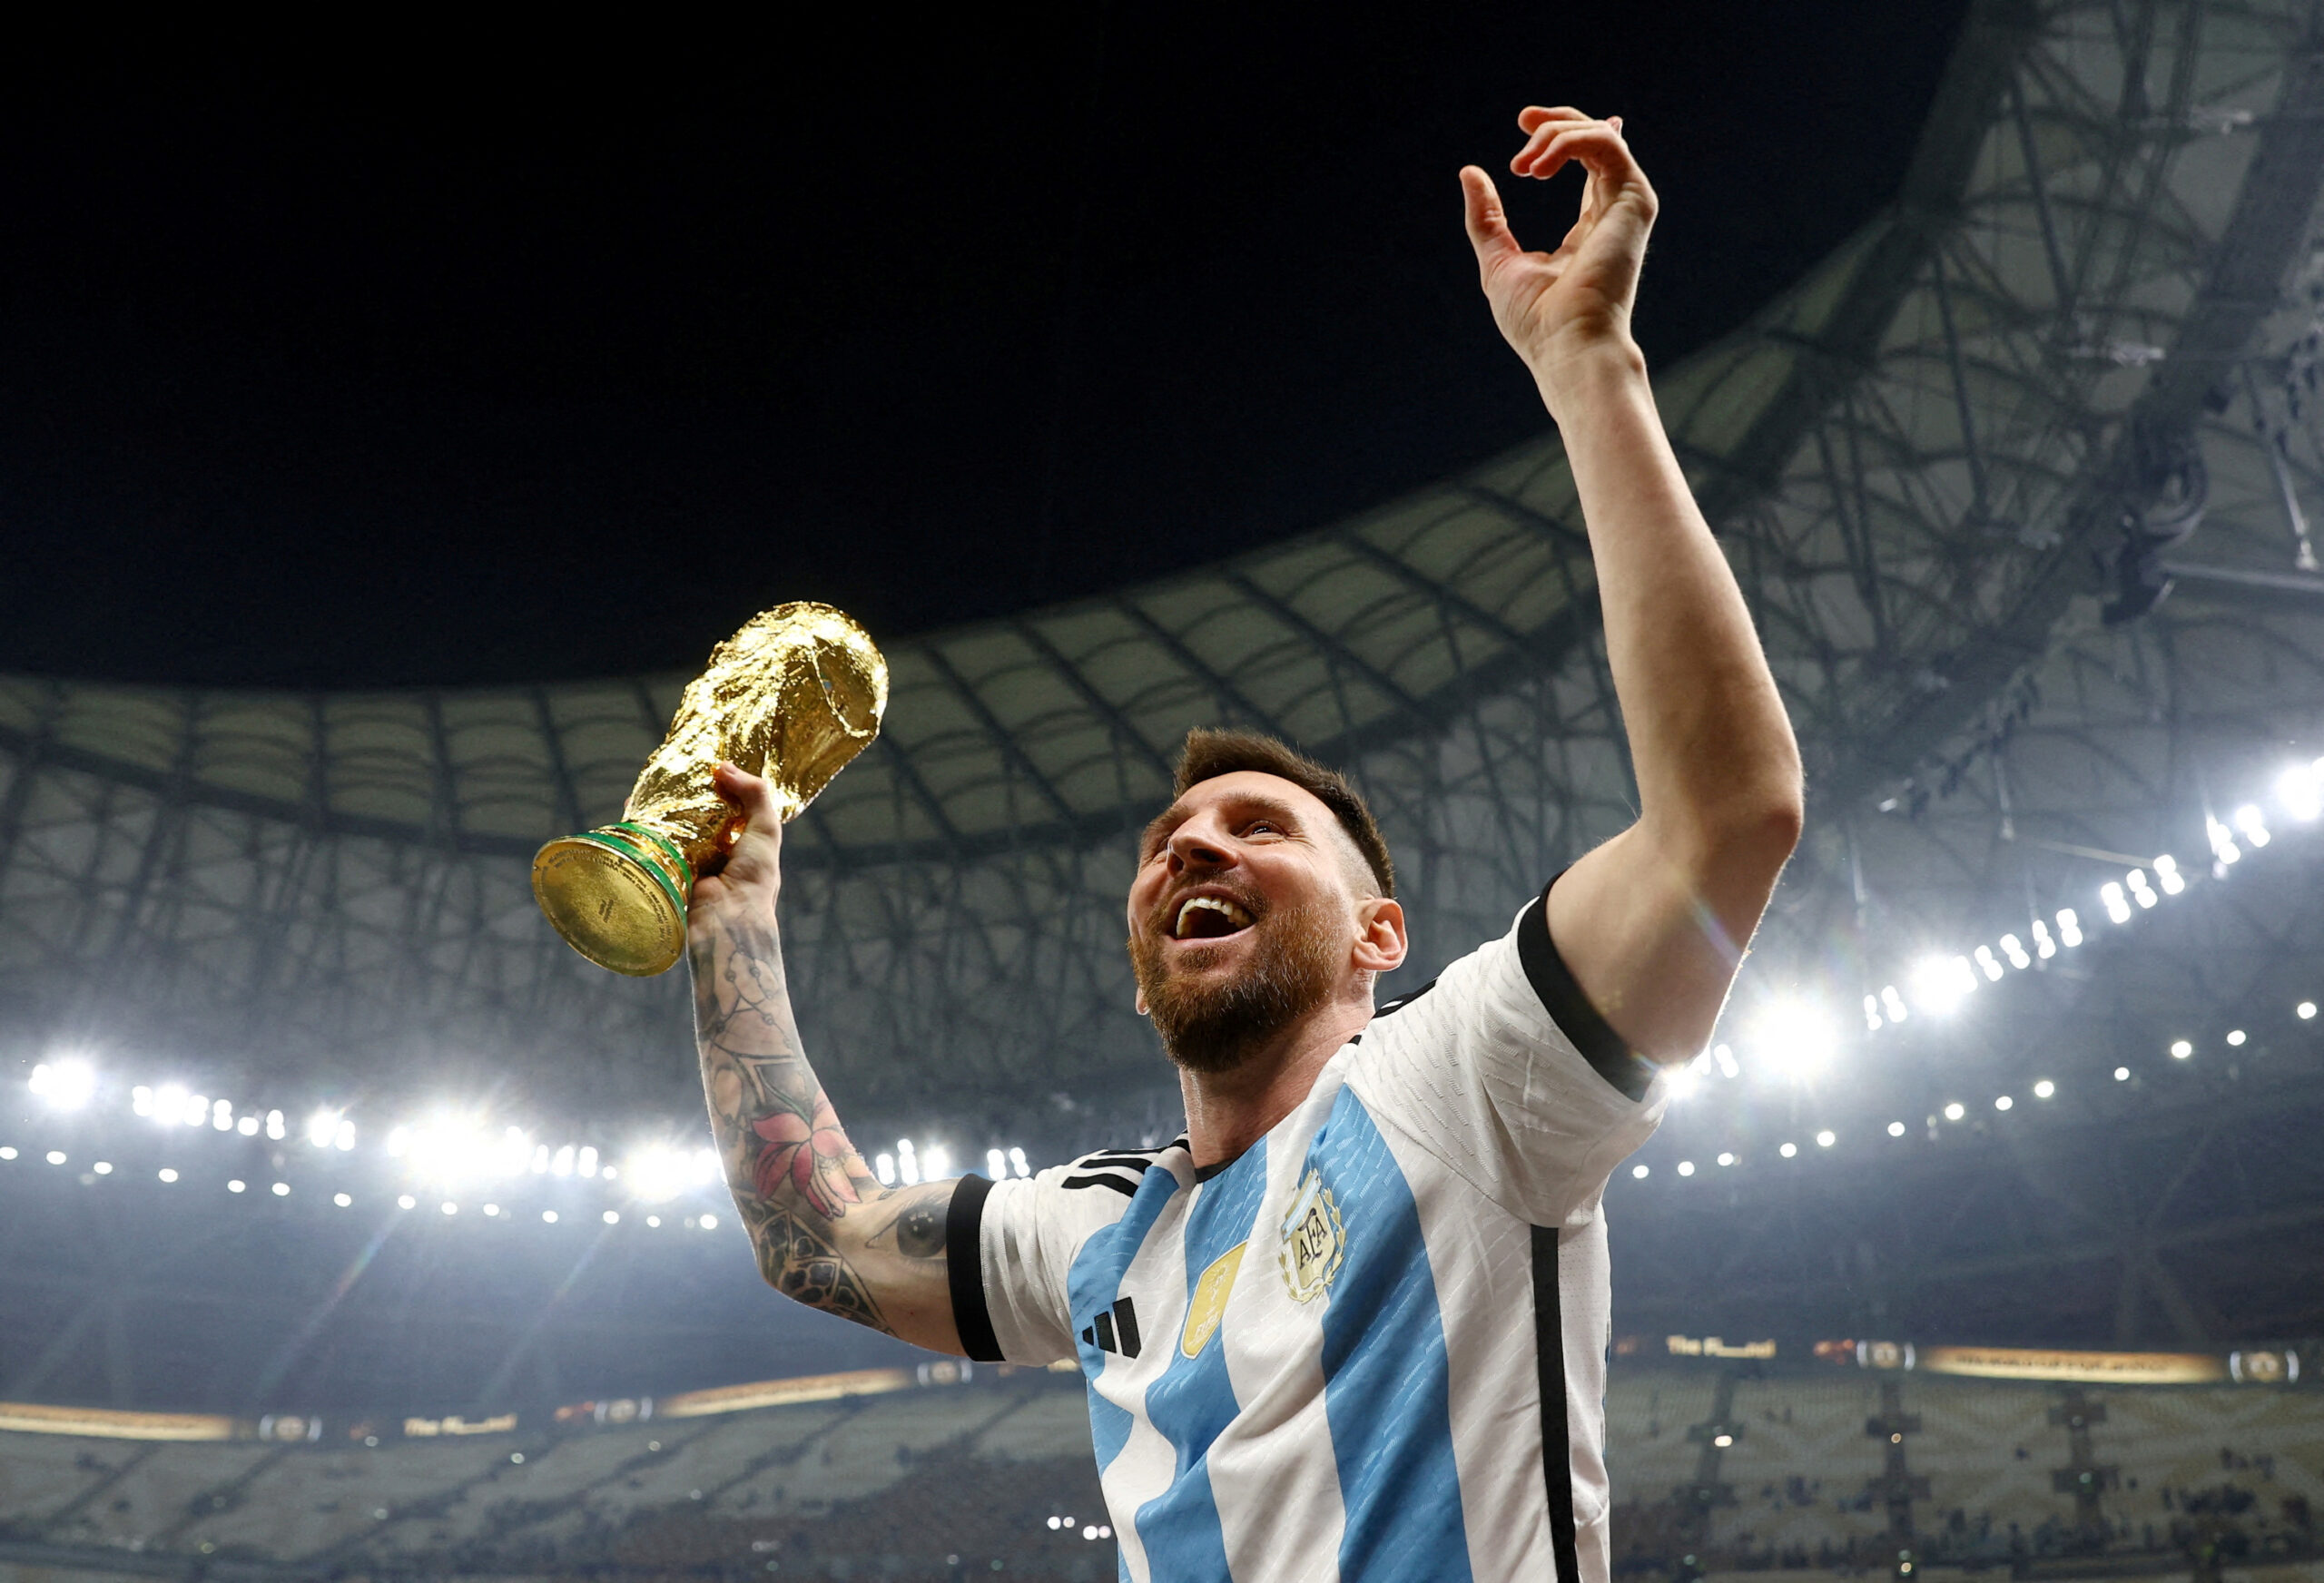 Argentina leads Ballon d’Or nominees list with four candidates